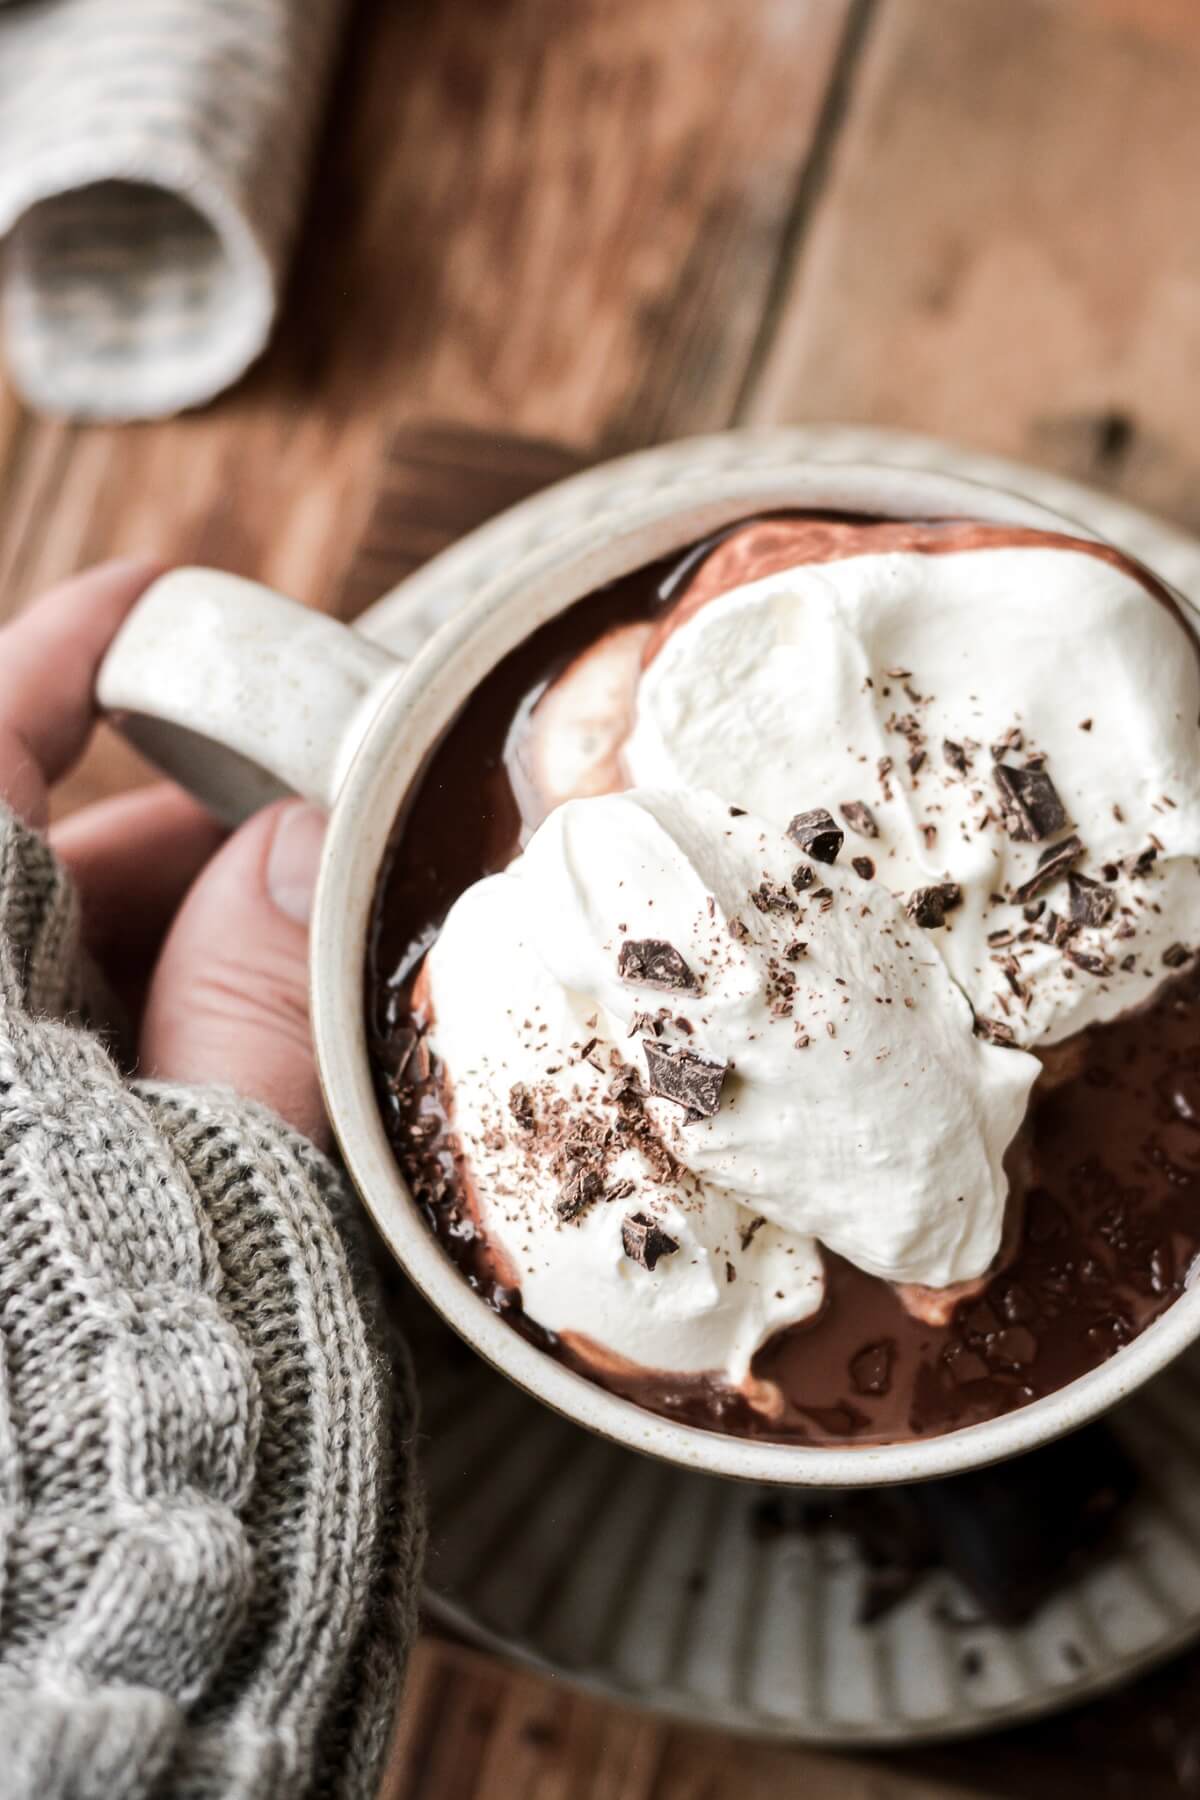 Whipped cream in a cup of hot chocolate.